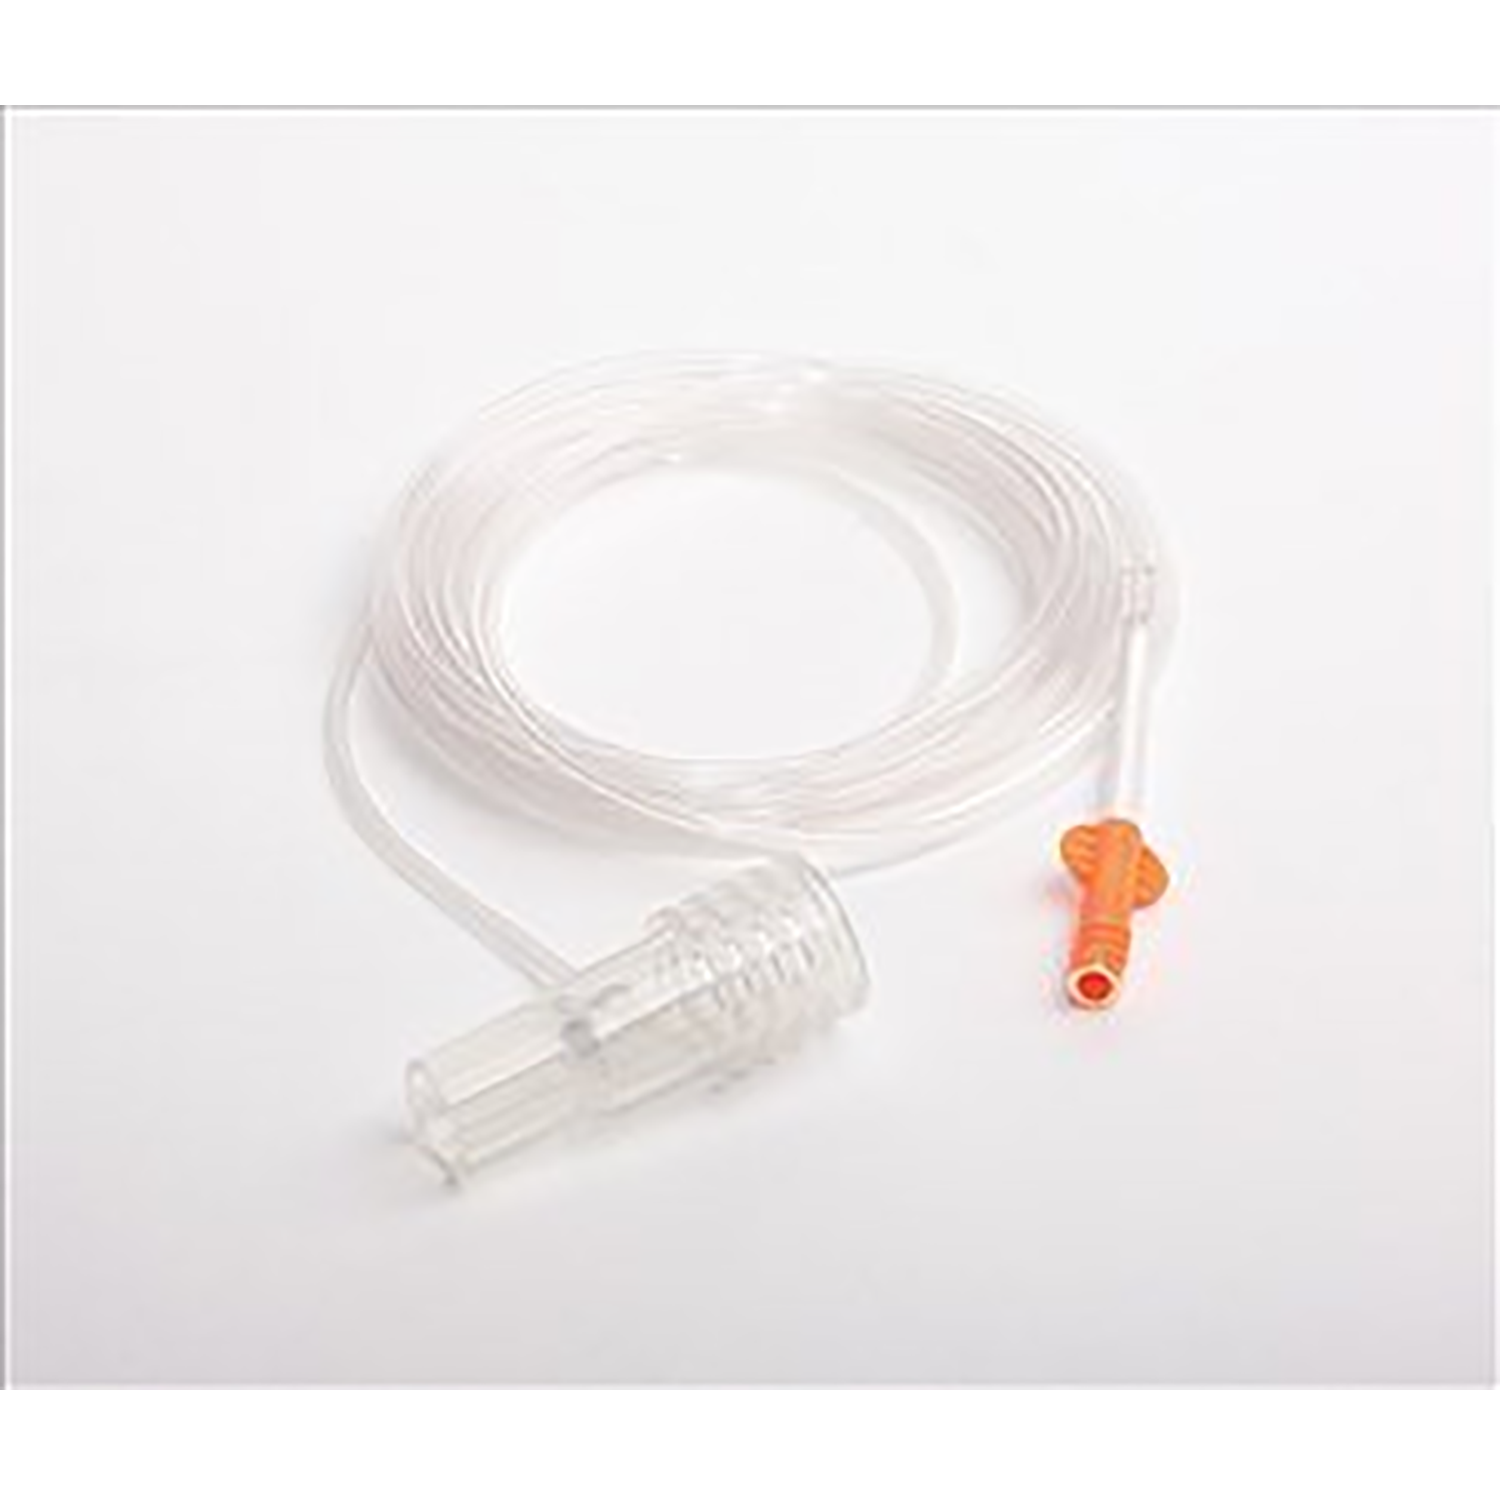 Microstream Advance Intubated Filter Line | Adult/Pediatric | Long | Pack of 25 (1)